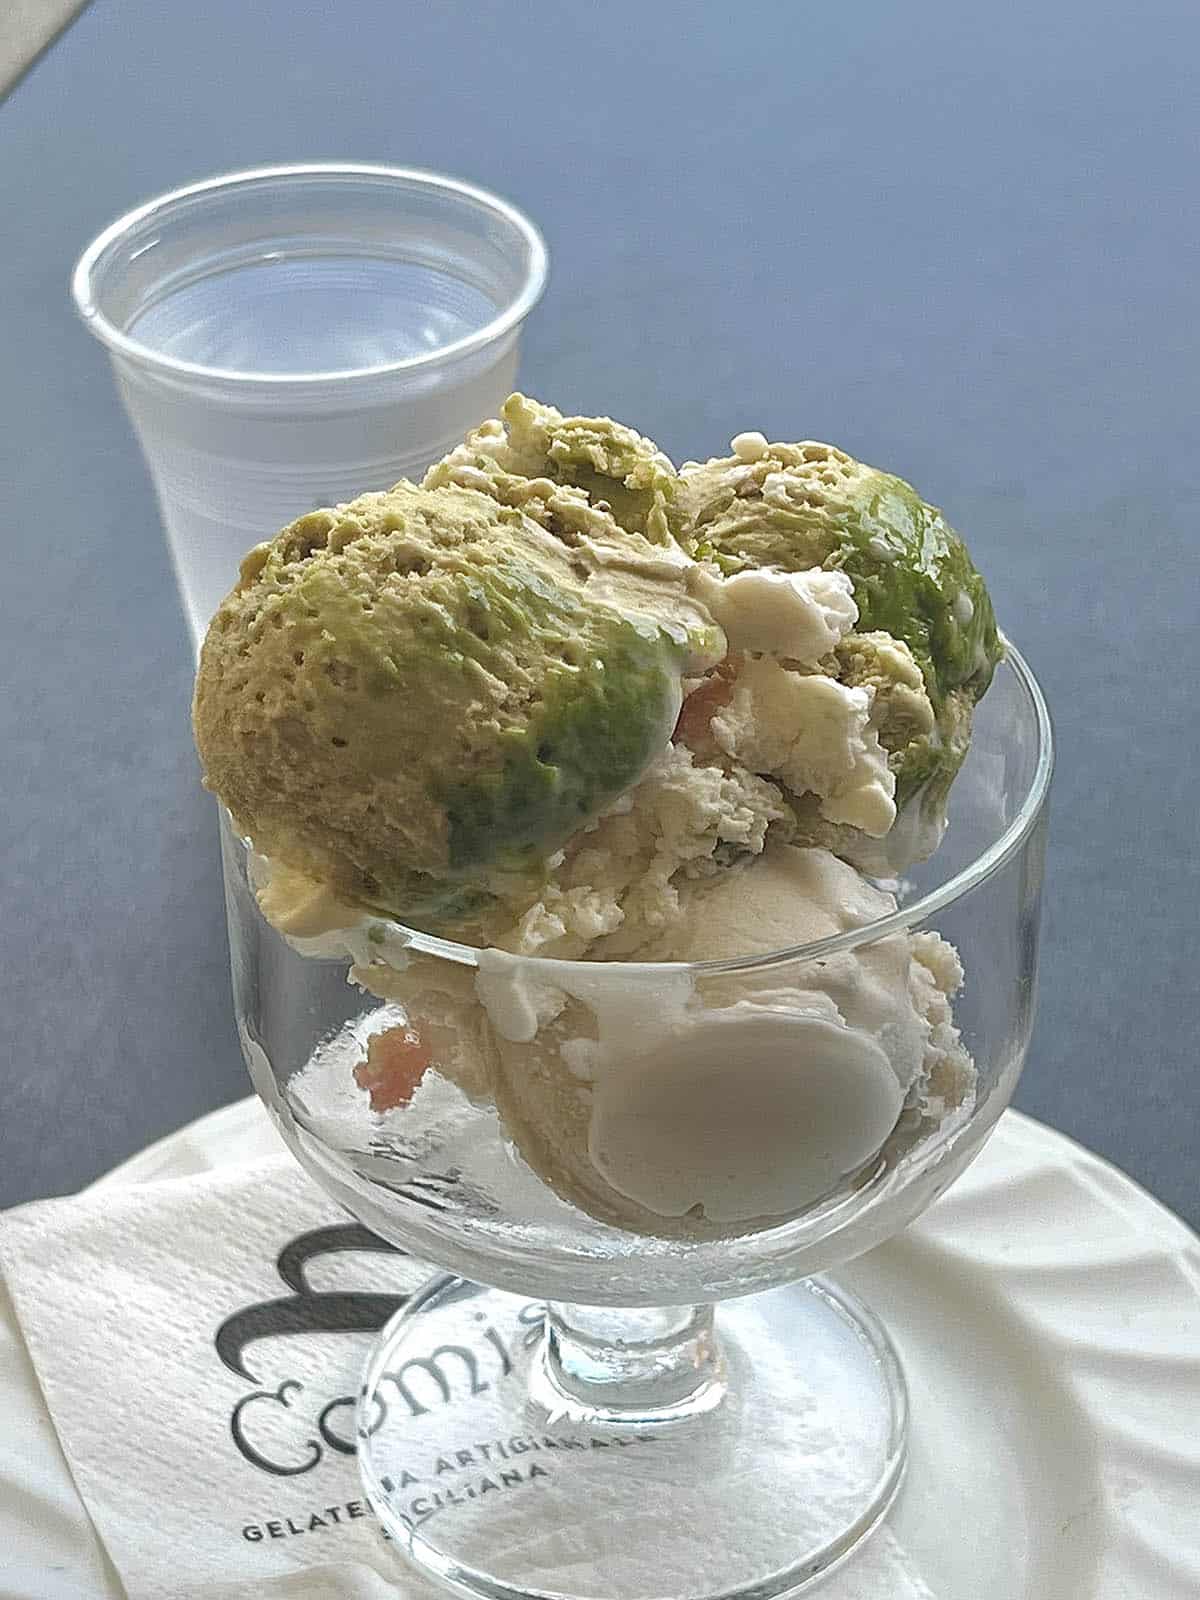 An image of a dessert glass filled with ice pistachio and lemon gelato. The glass sits on a branded serviette atop a plate on a dark grey table.